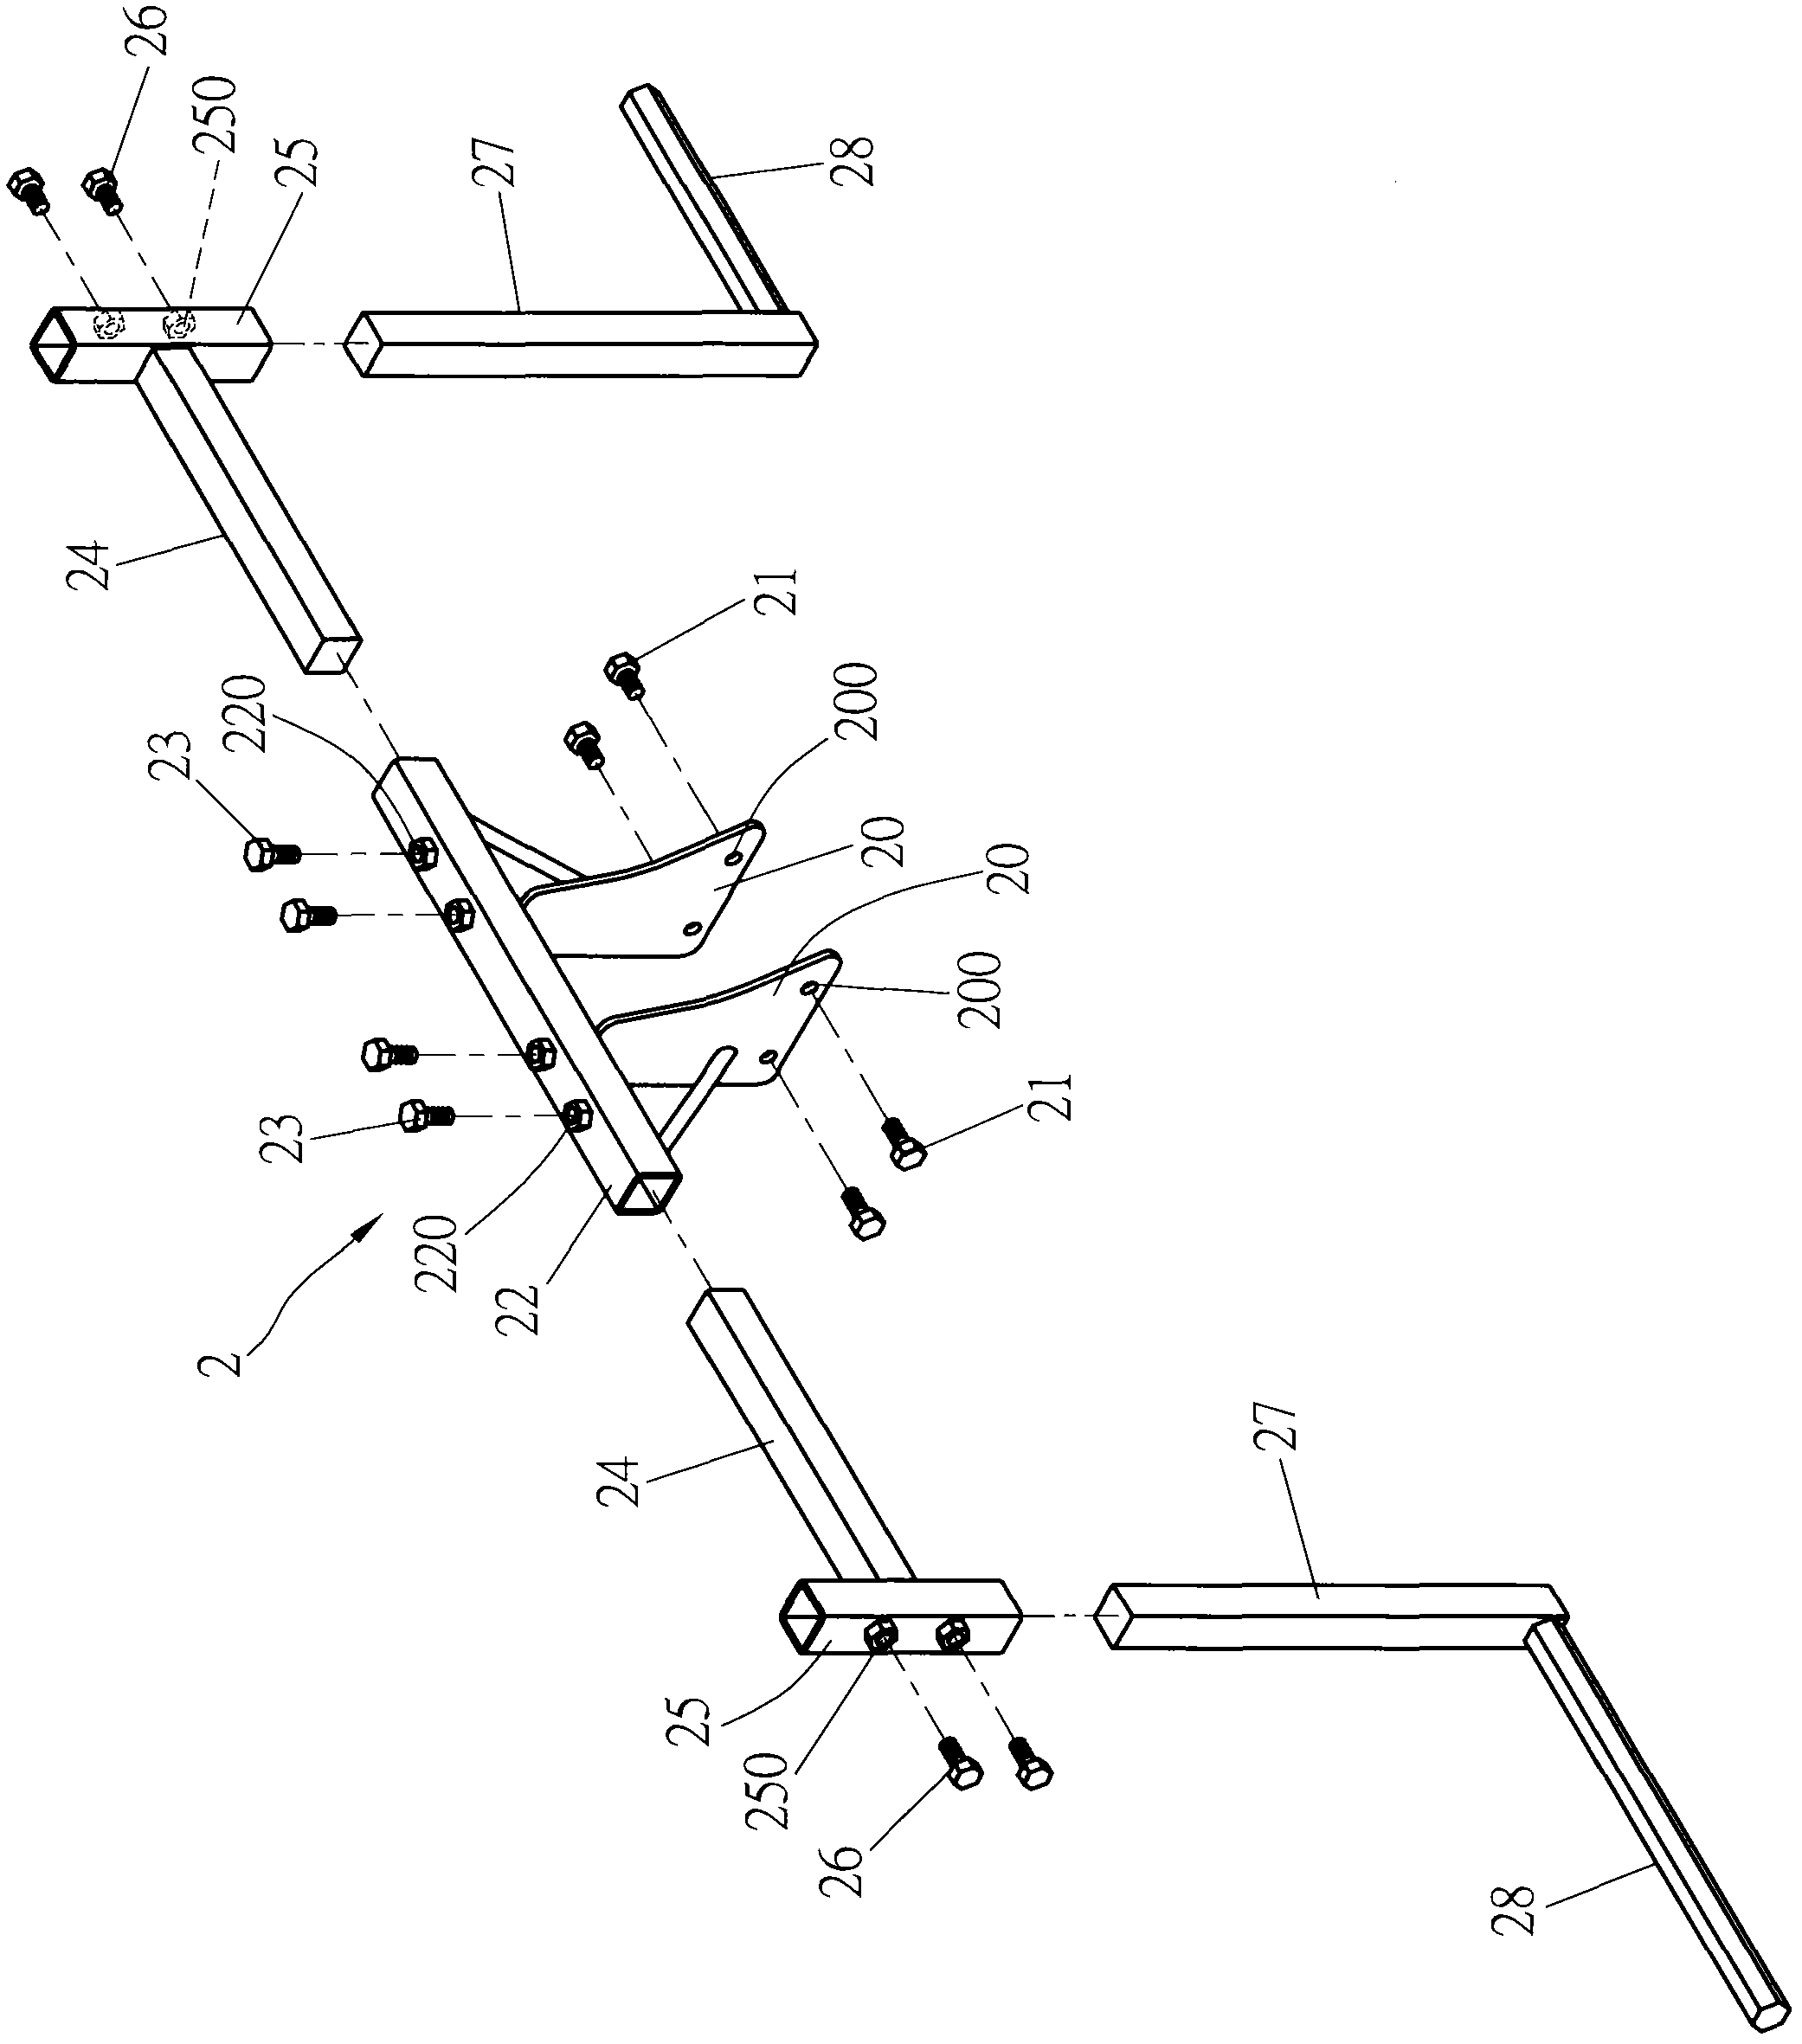 Support frame structure of seeding devices